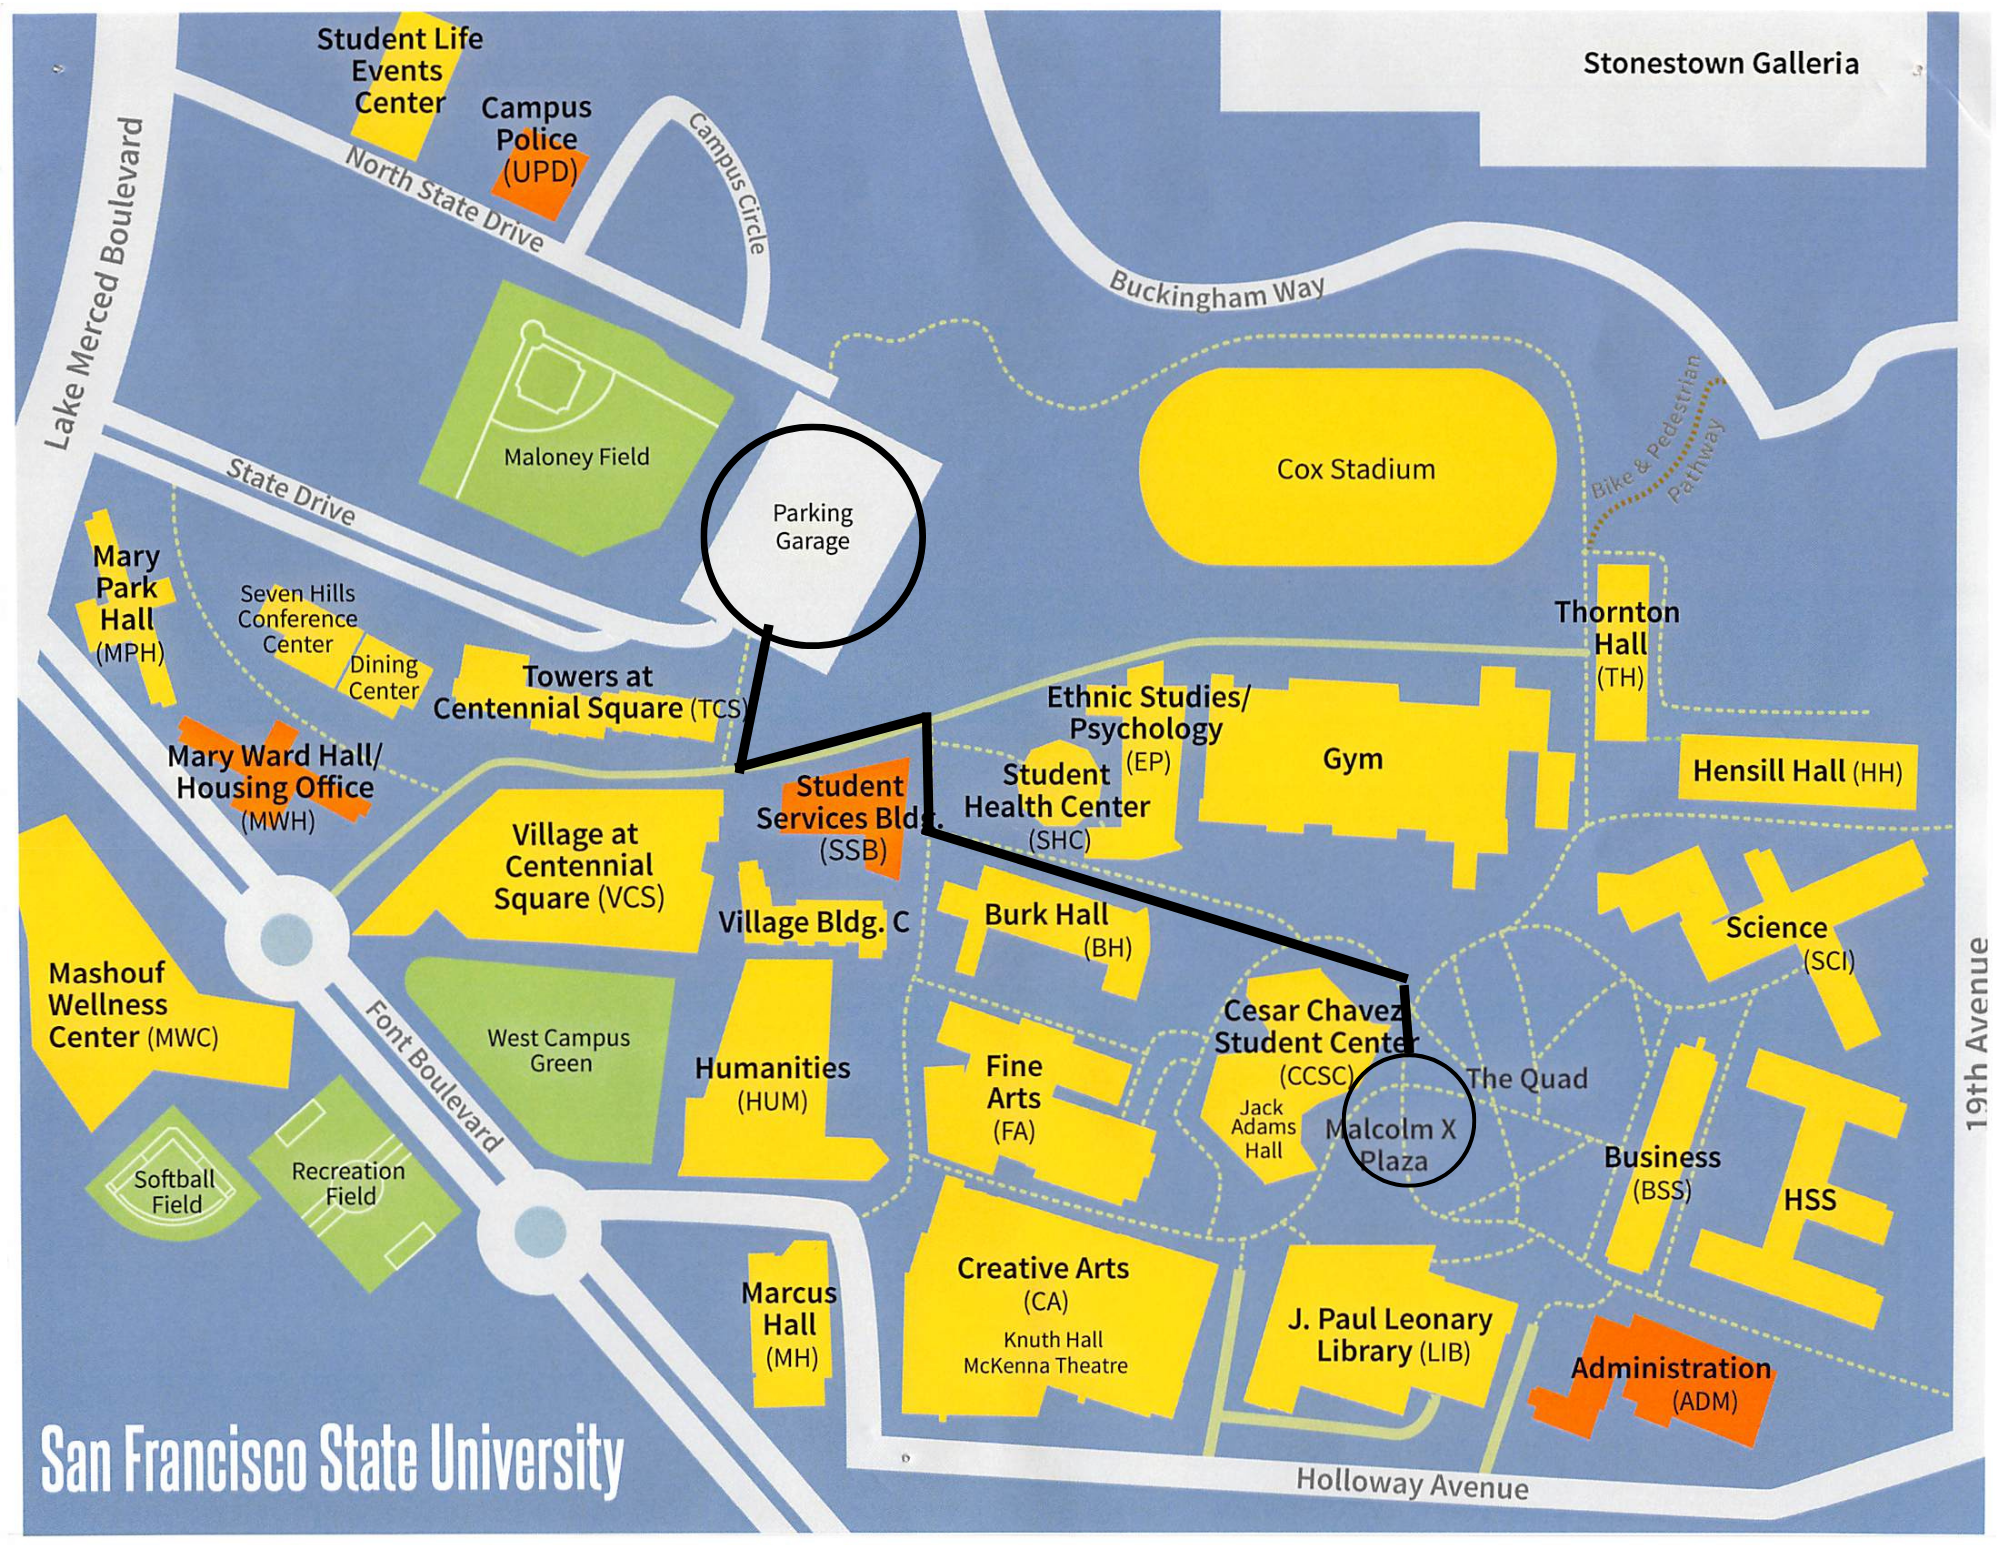 Directions from Lot 20 to the outdoor quad in front of the Cesar Chavez building